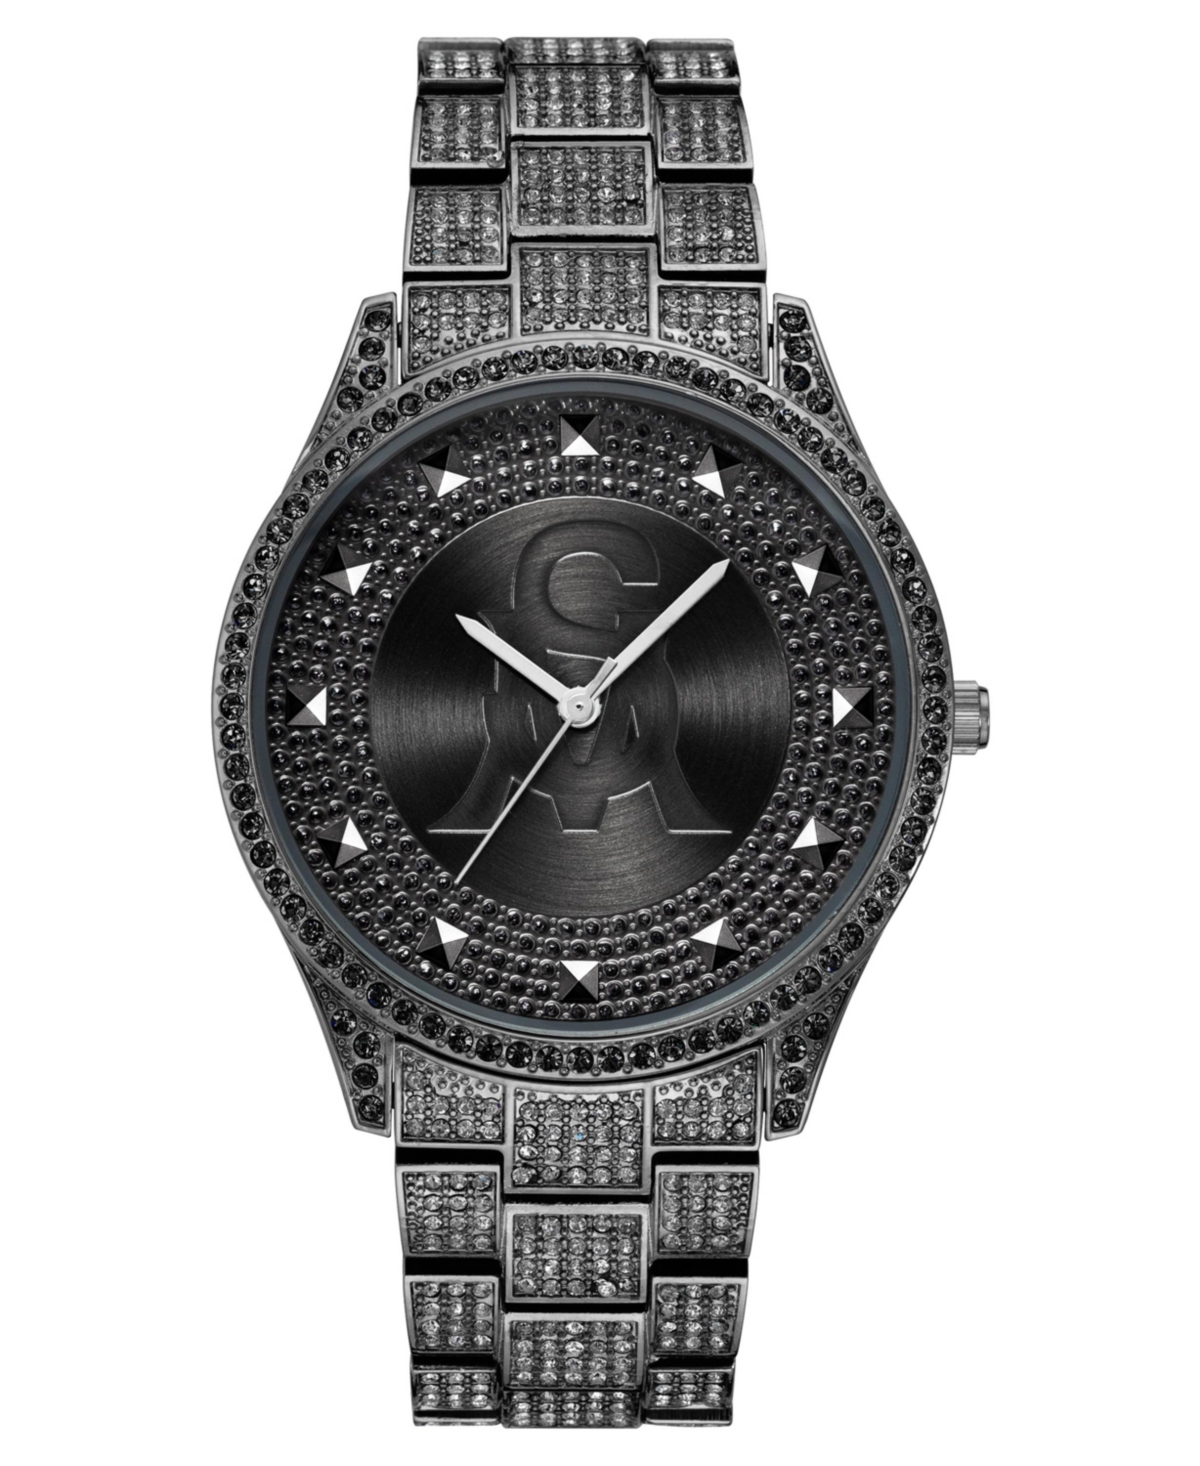 Women's Black-Tone Metal Bracelet and Accented with Black Crystals Watch, 40mm - Black